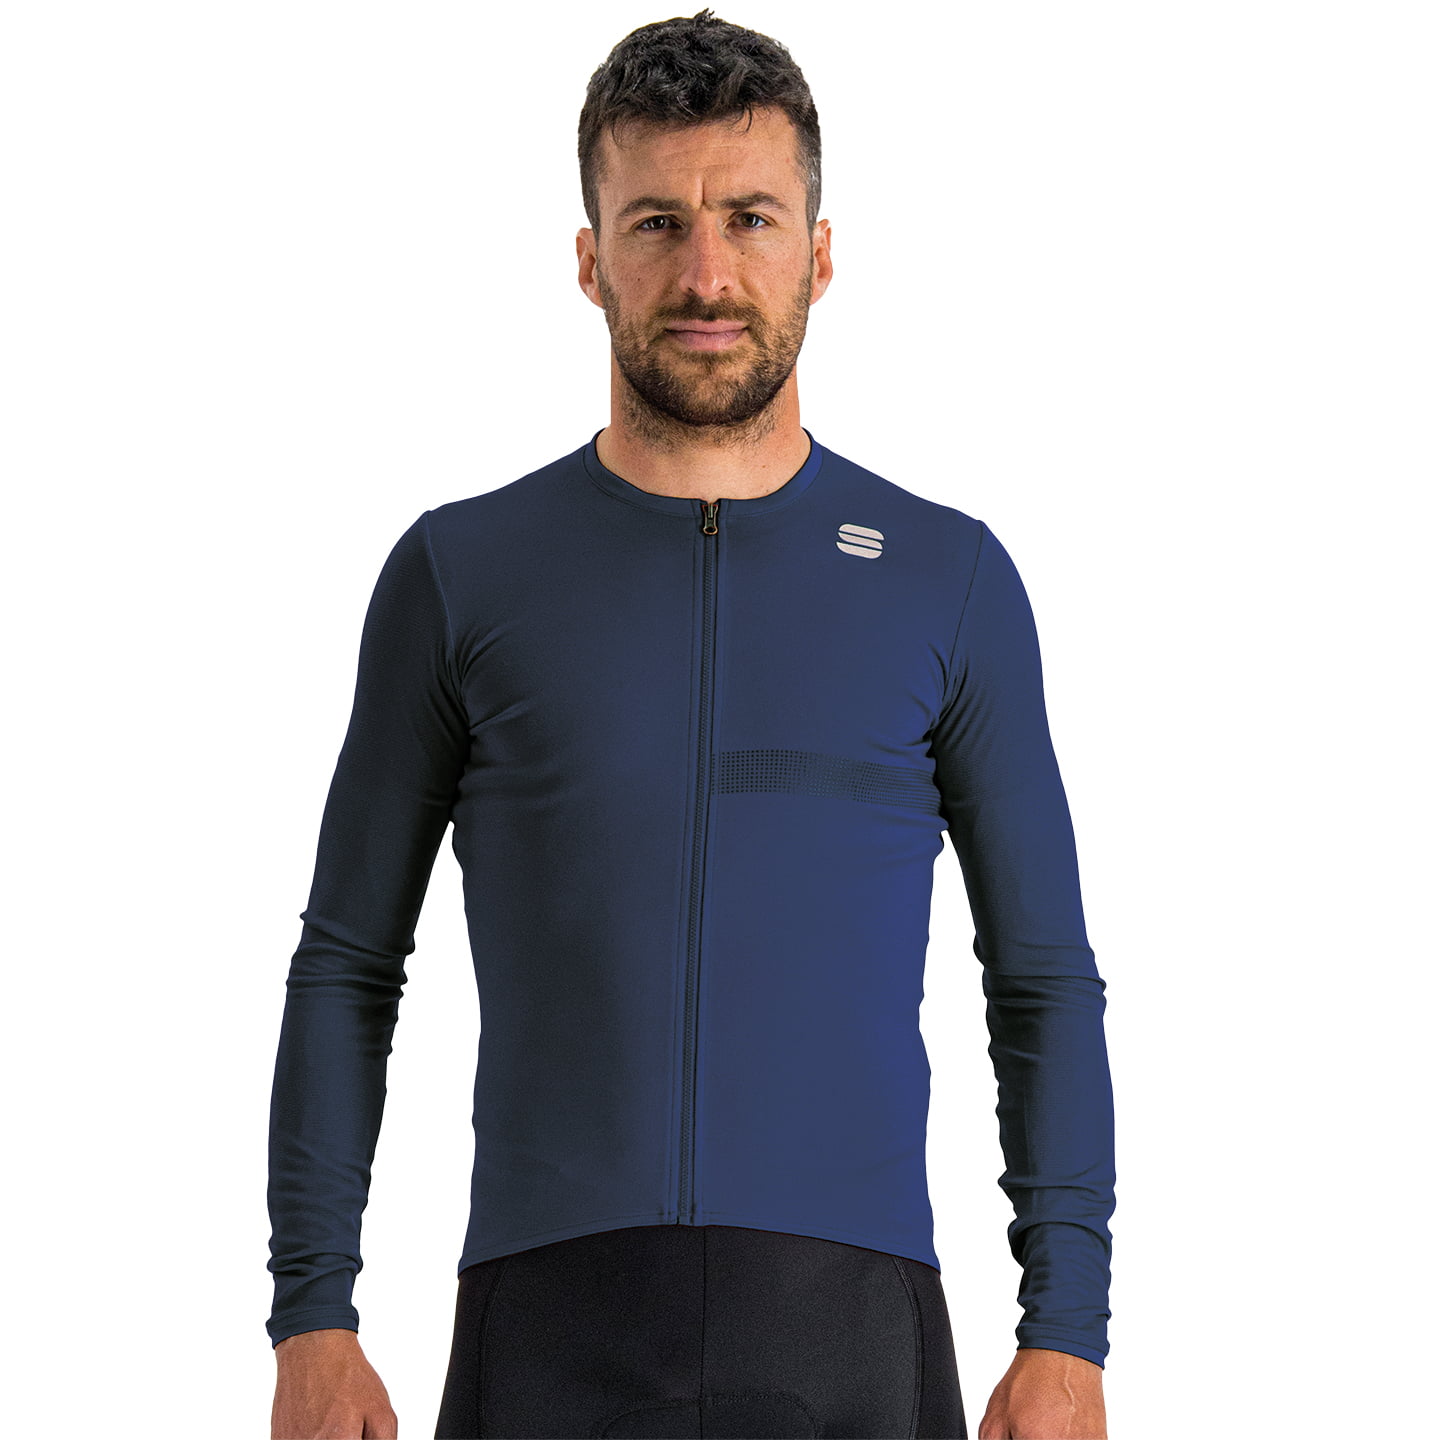 SPORTFUL Matchy Long Sleeve Jersey Long Sleeve Jersey, for men, size 2XL, Cycling jersey, Cycle clothing